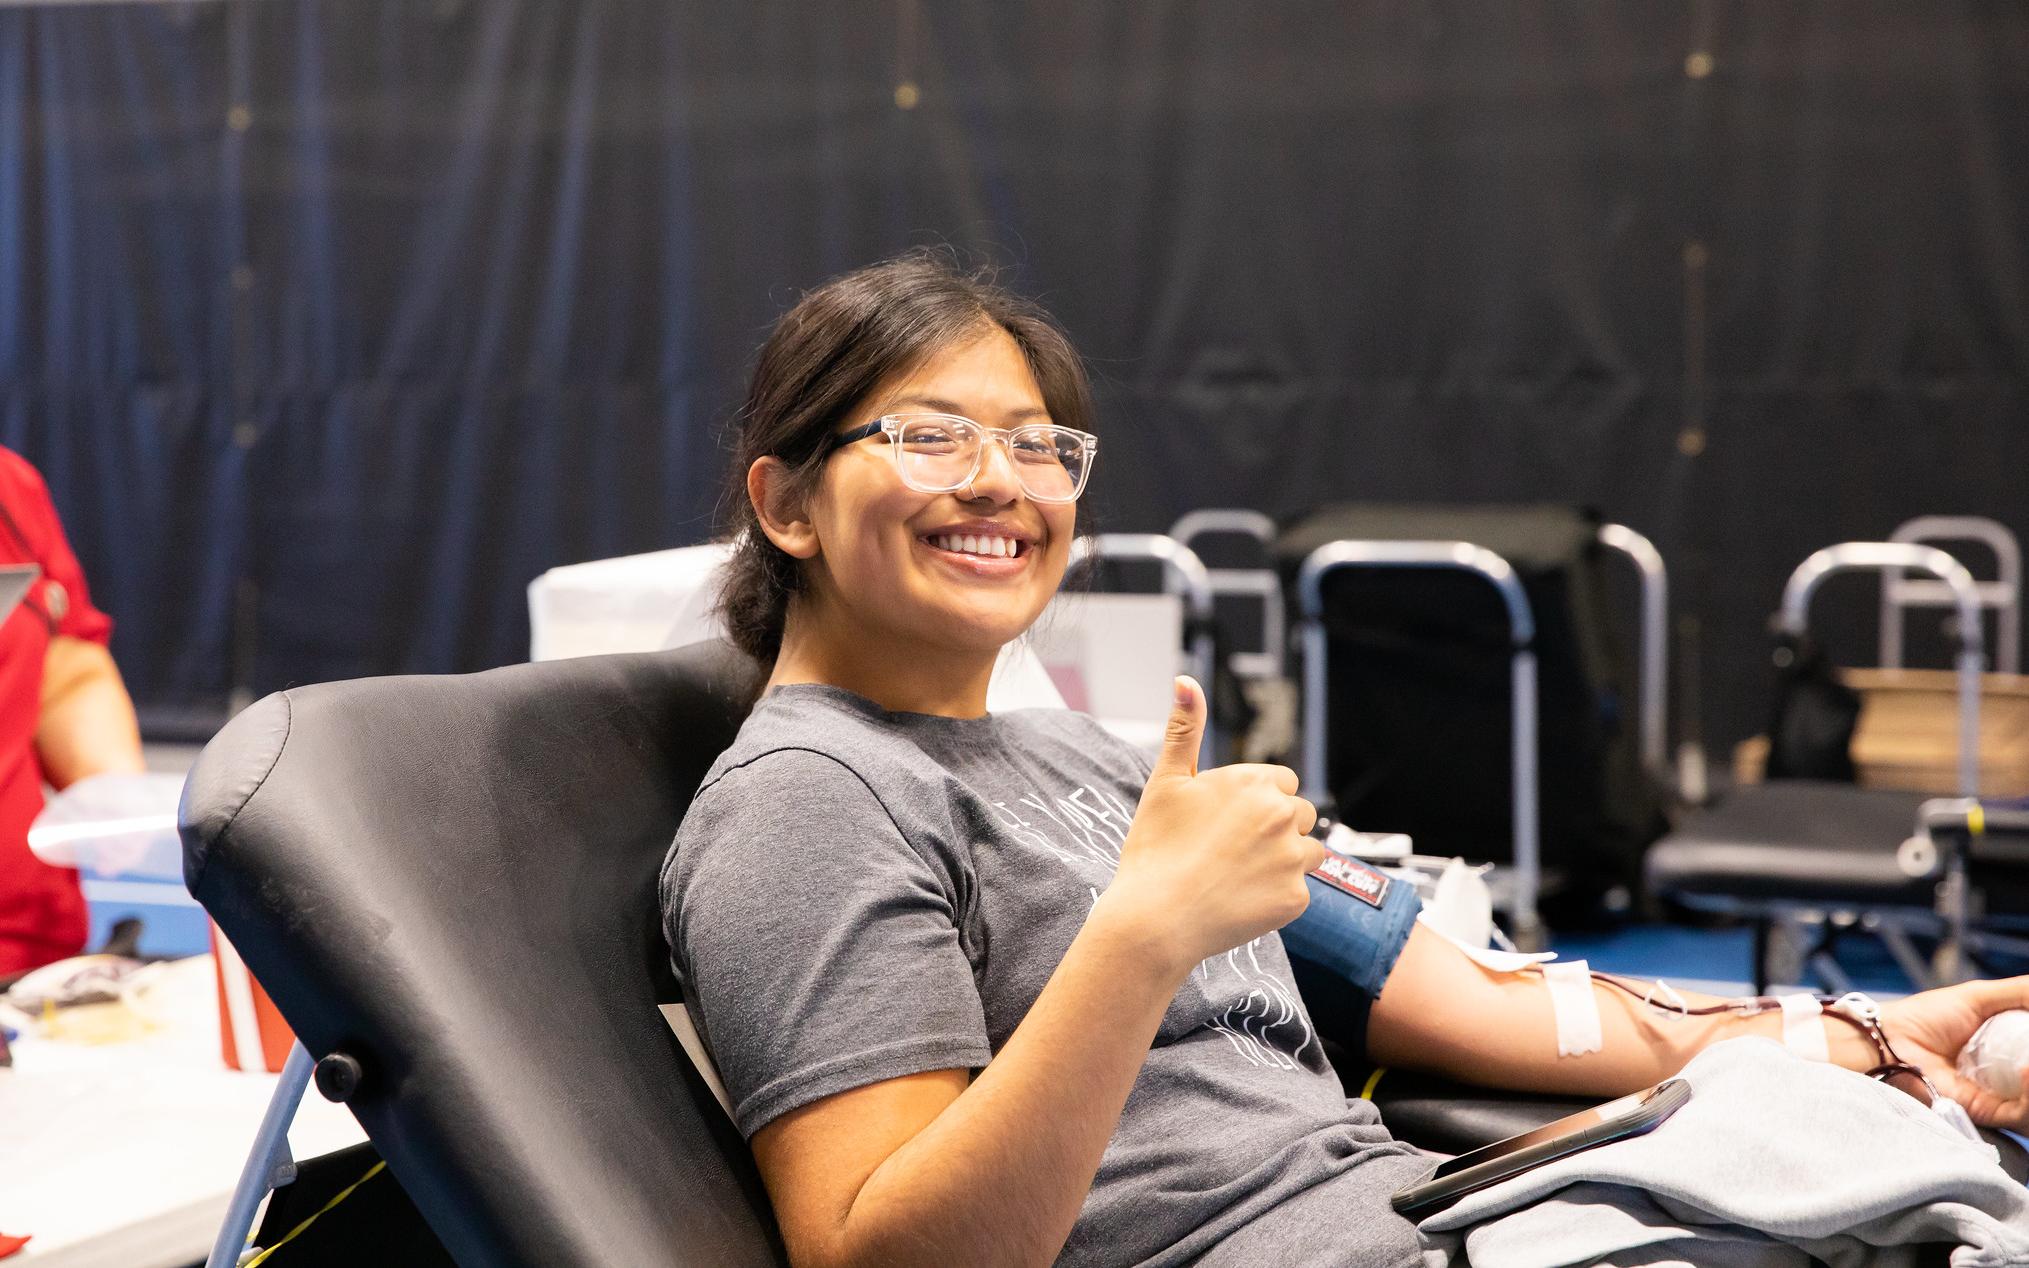 women giving a thumbs up while donating blood